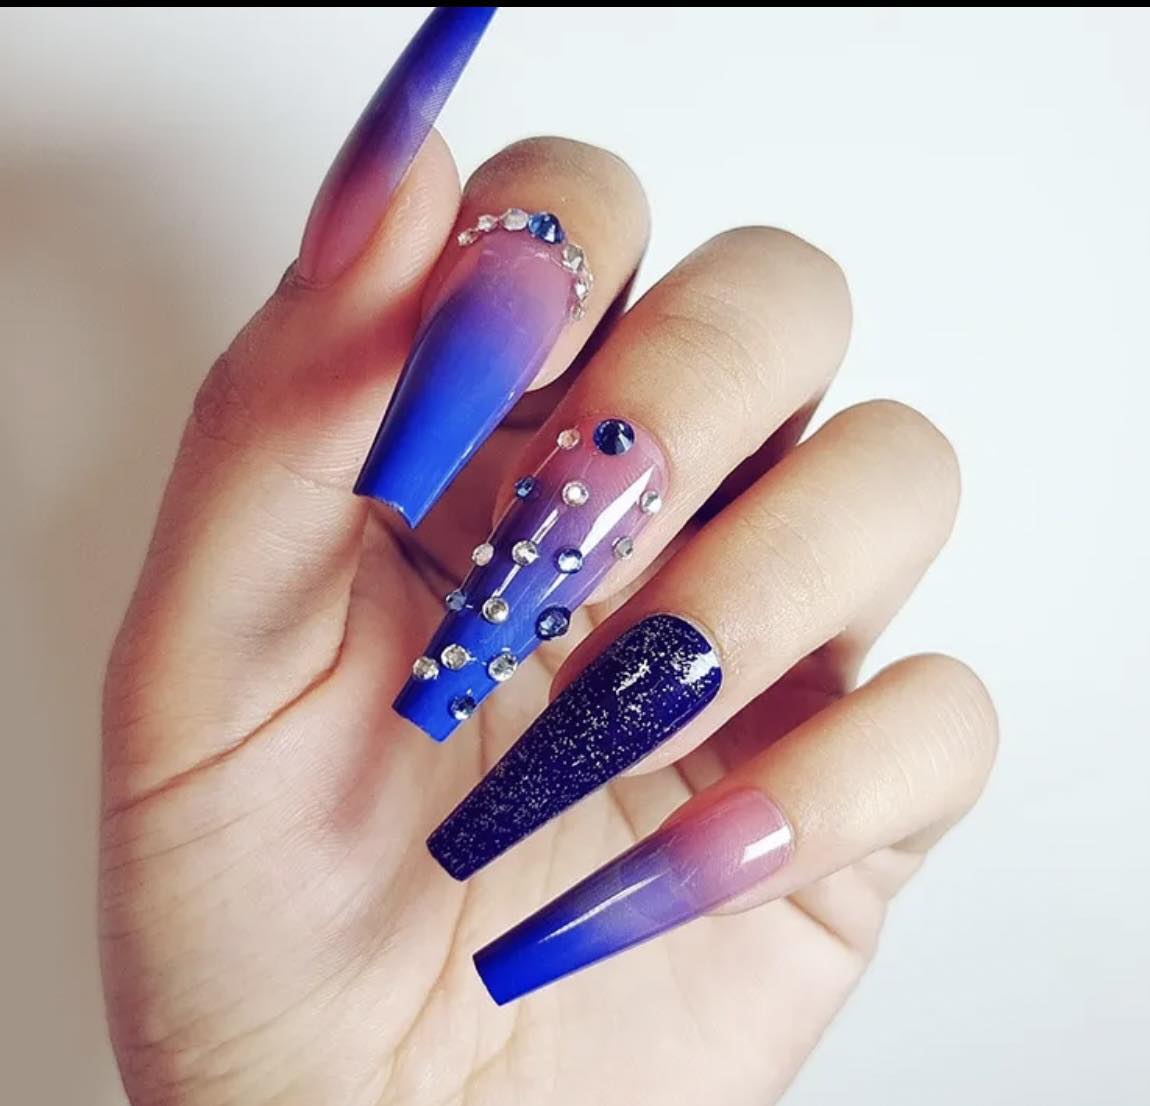 Long Coffin Press on Nails. Blue Ombre, Glitter & Jewel. Durable Acrylic Press on Nails. Easy and quick to apply. Great for those special occasions, parties or add an edge to any outfit. Gorgeous, flattering and you can re-use them again and again.